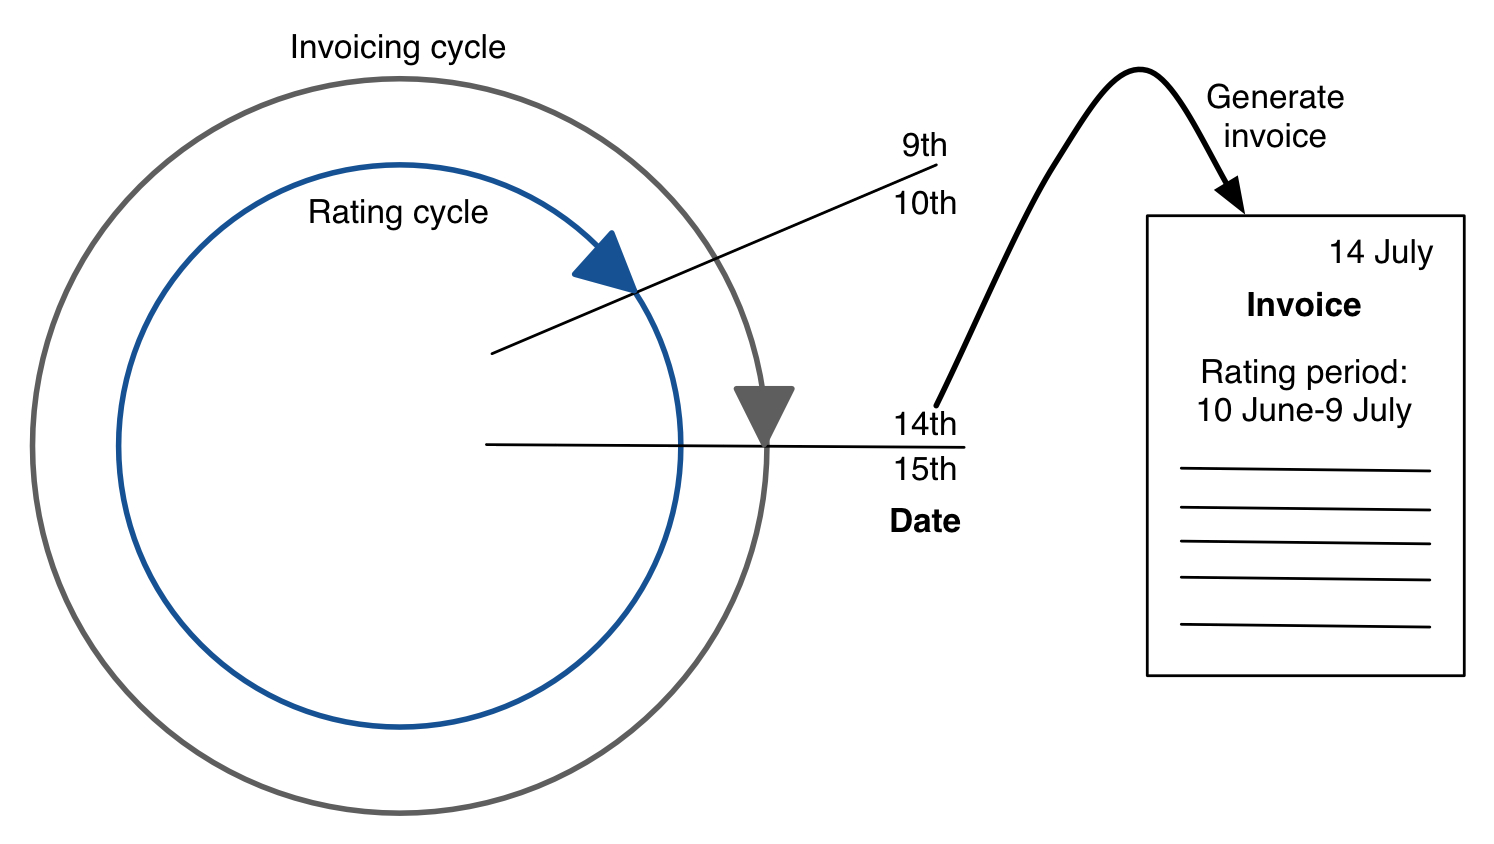 The image shows a subscription with different end dates for the rating cycle and invoicing cycle.